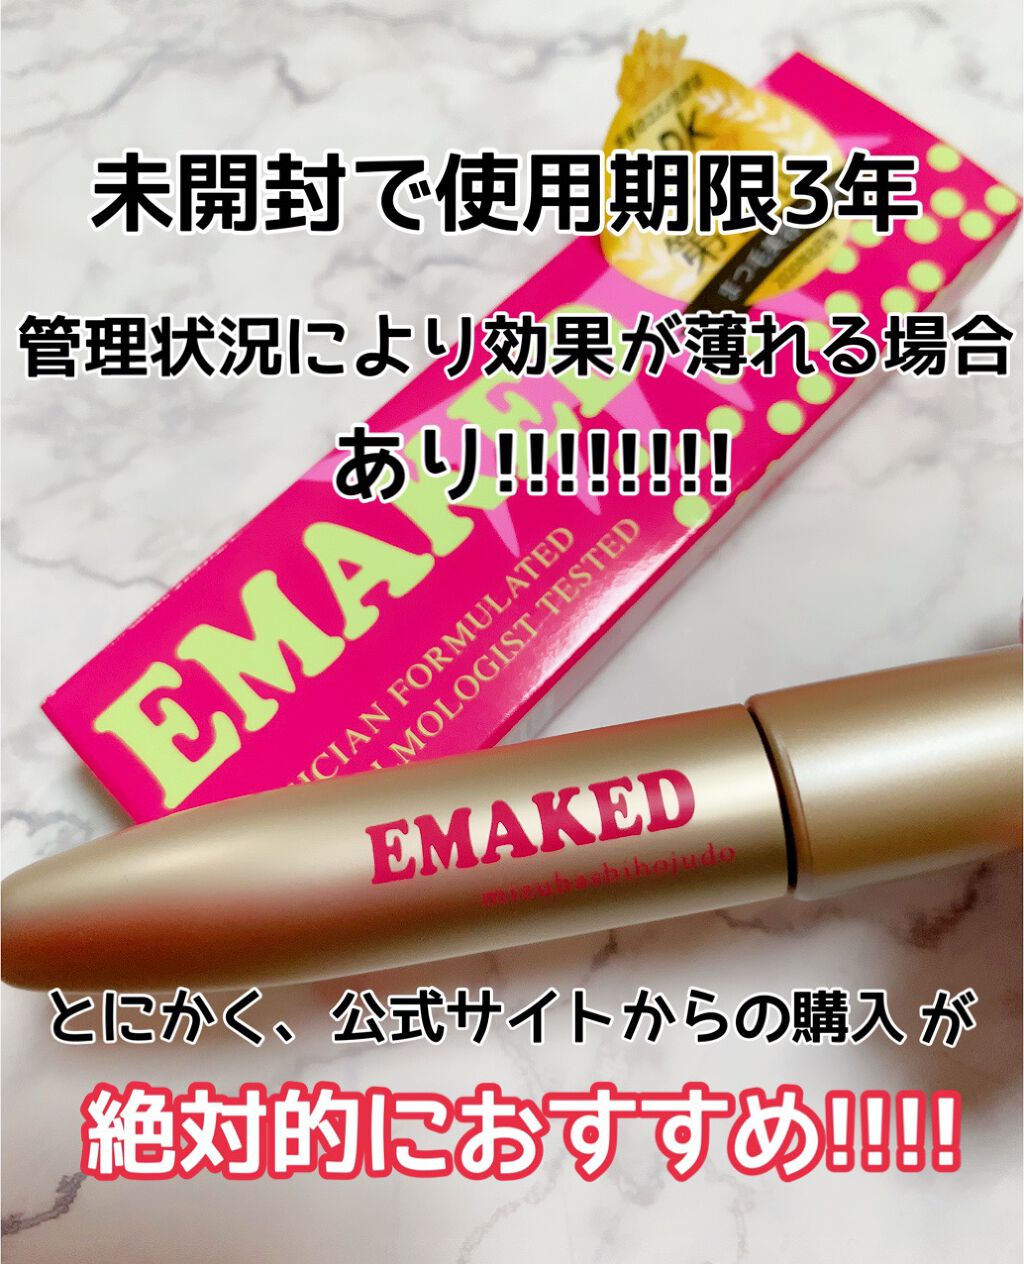 EMAKED エマーキット　まつ毛美容液　未開封新品